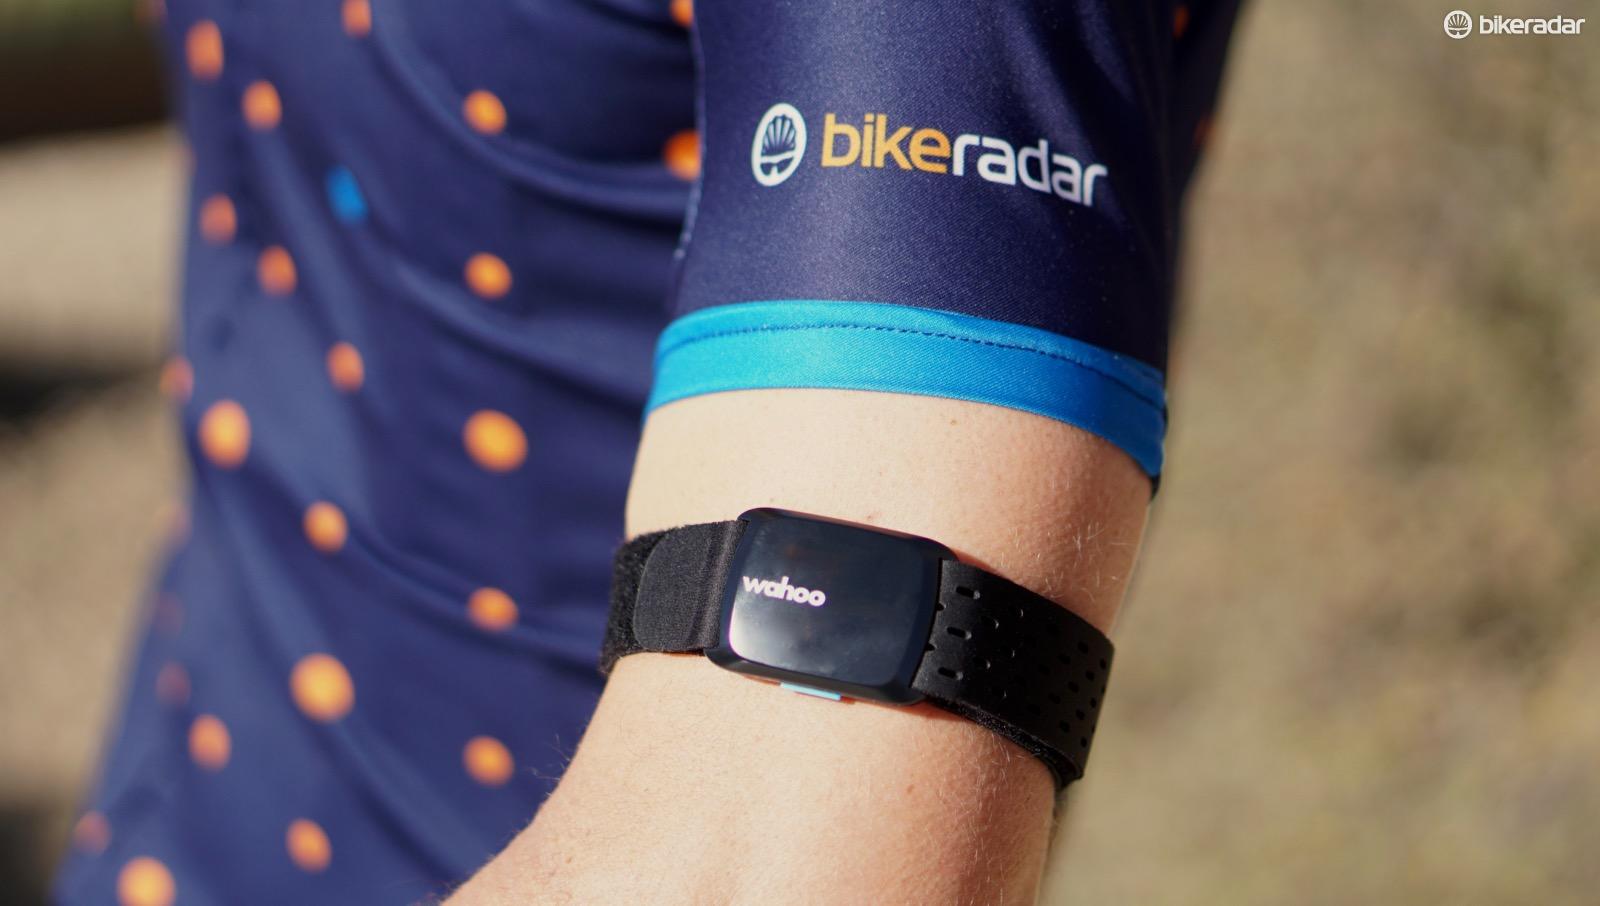 TICKR Fit Armband Heart Rate Monitor